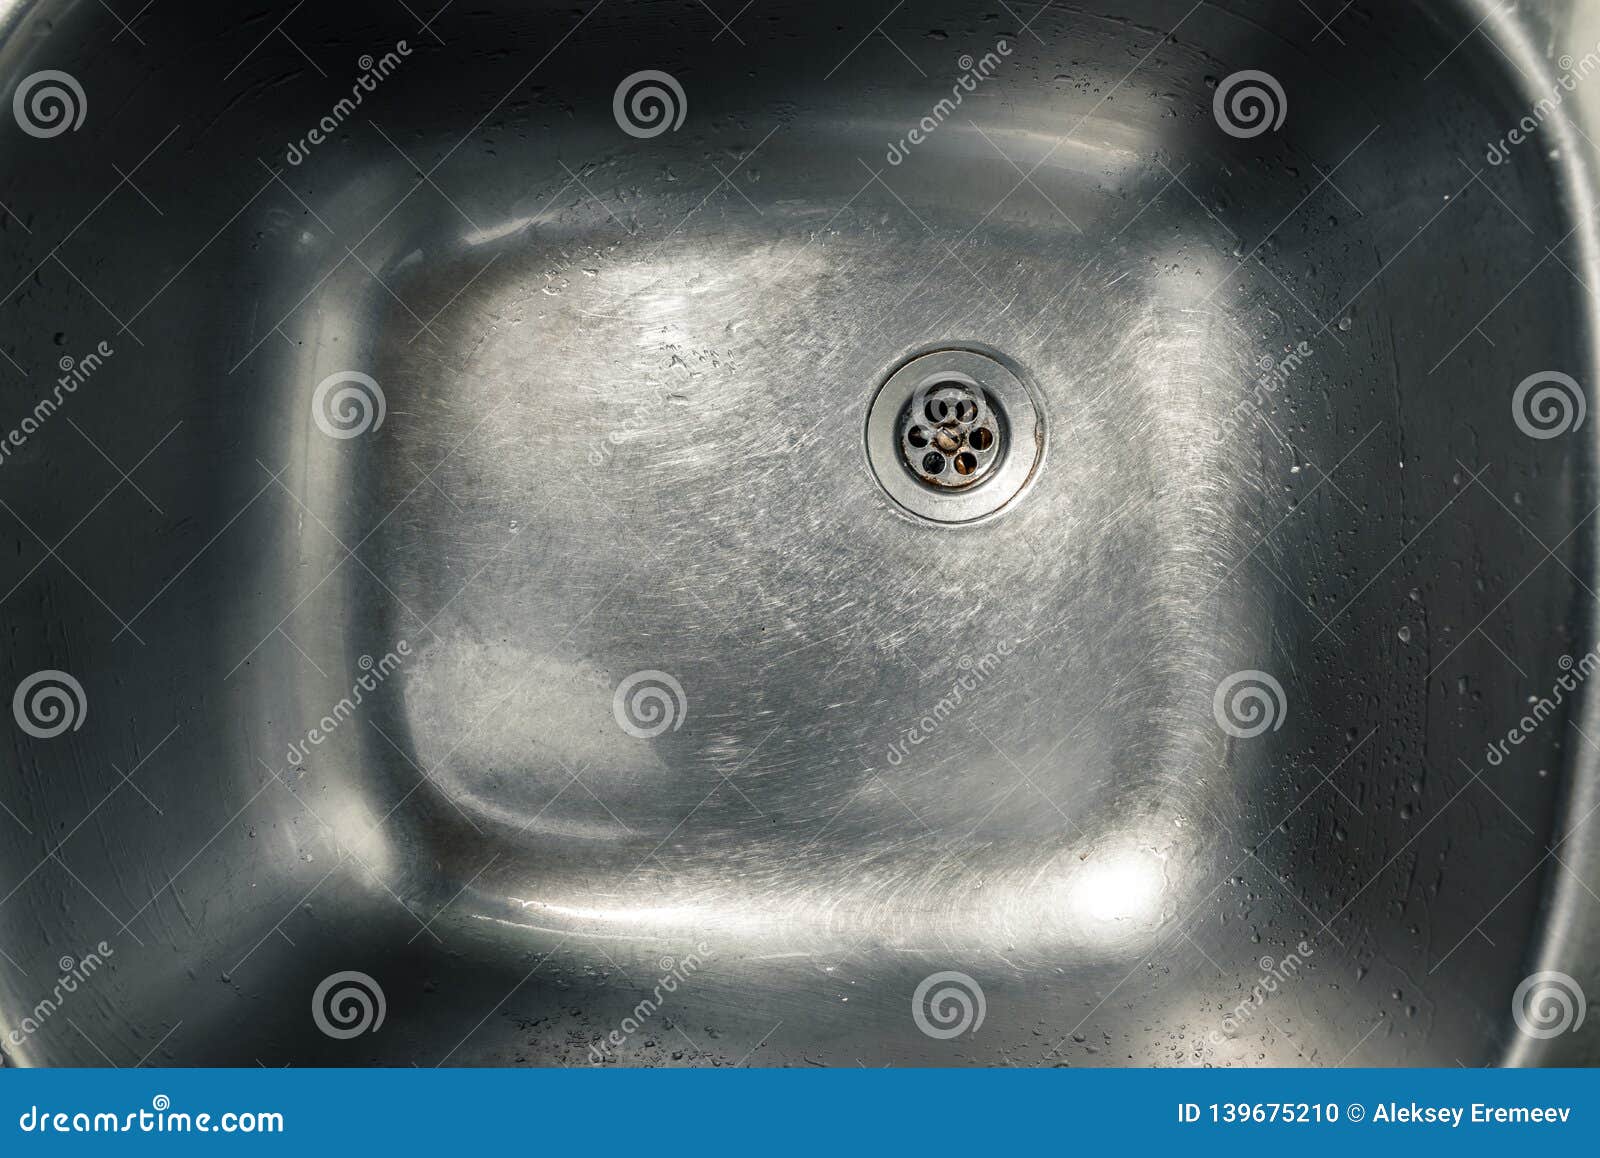 Clean Sink With Faucet Stock Photo Image Of Kitchen 139675210